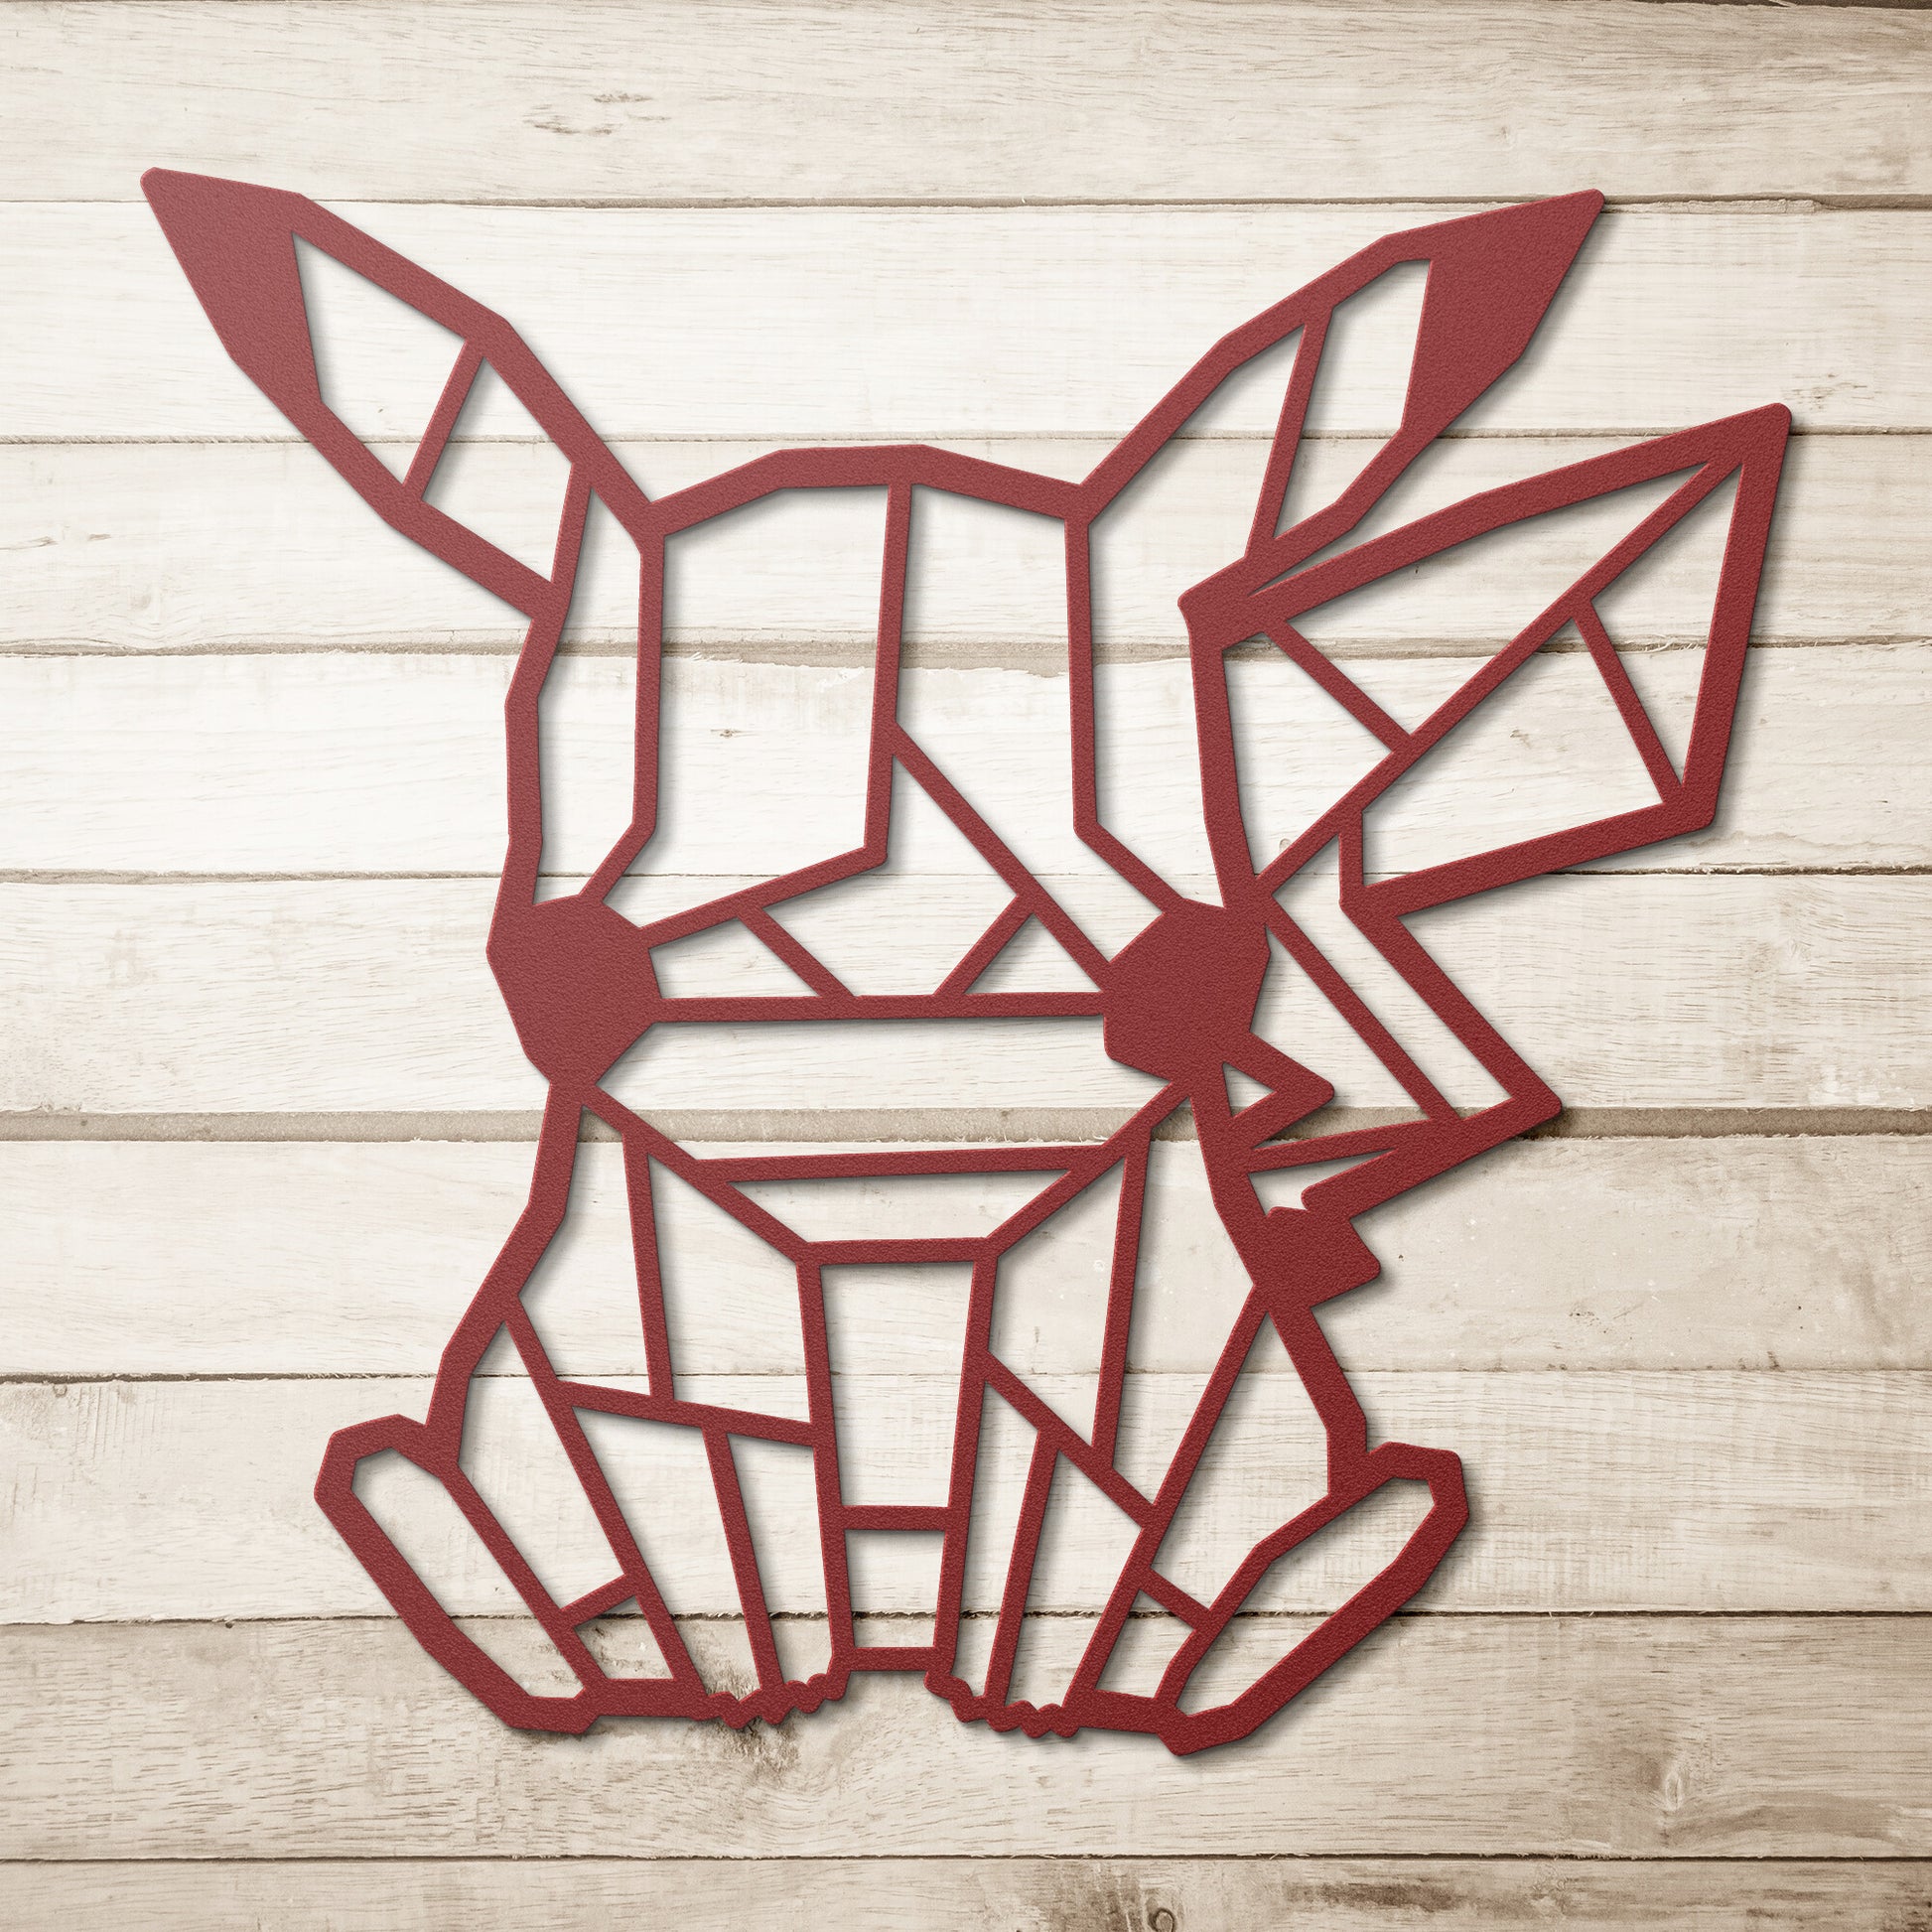 Metal Wall Art Sign of pikachu in geometric style hanging on the wall. This picture shows the design of this pokemon in the color red